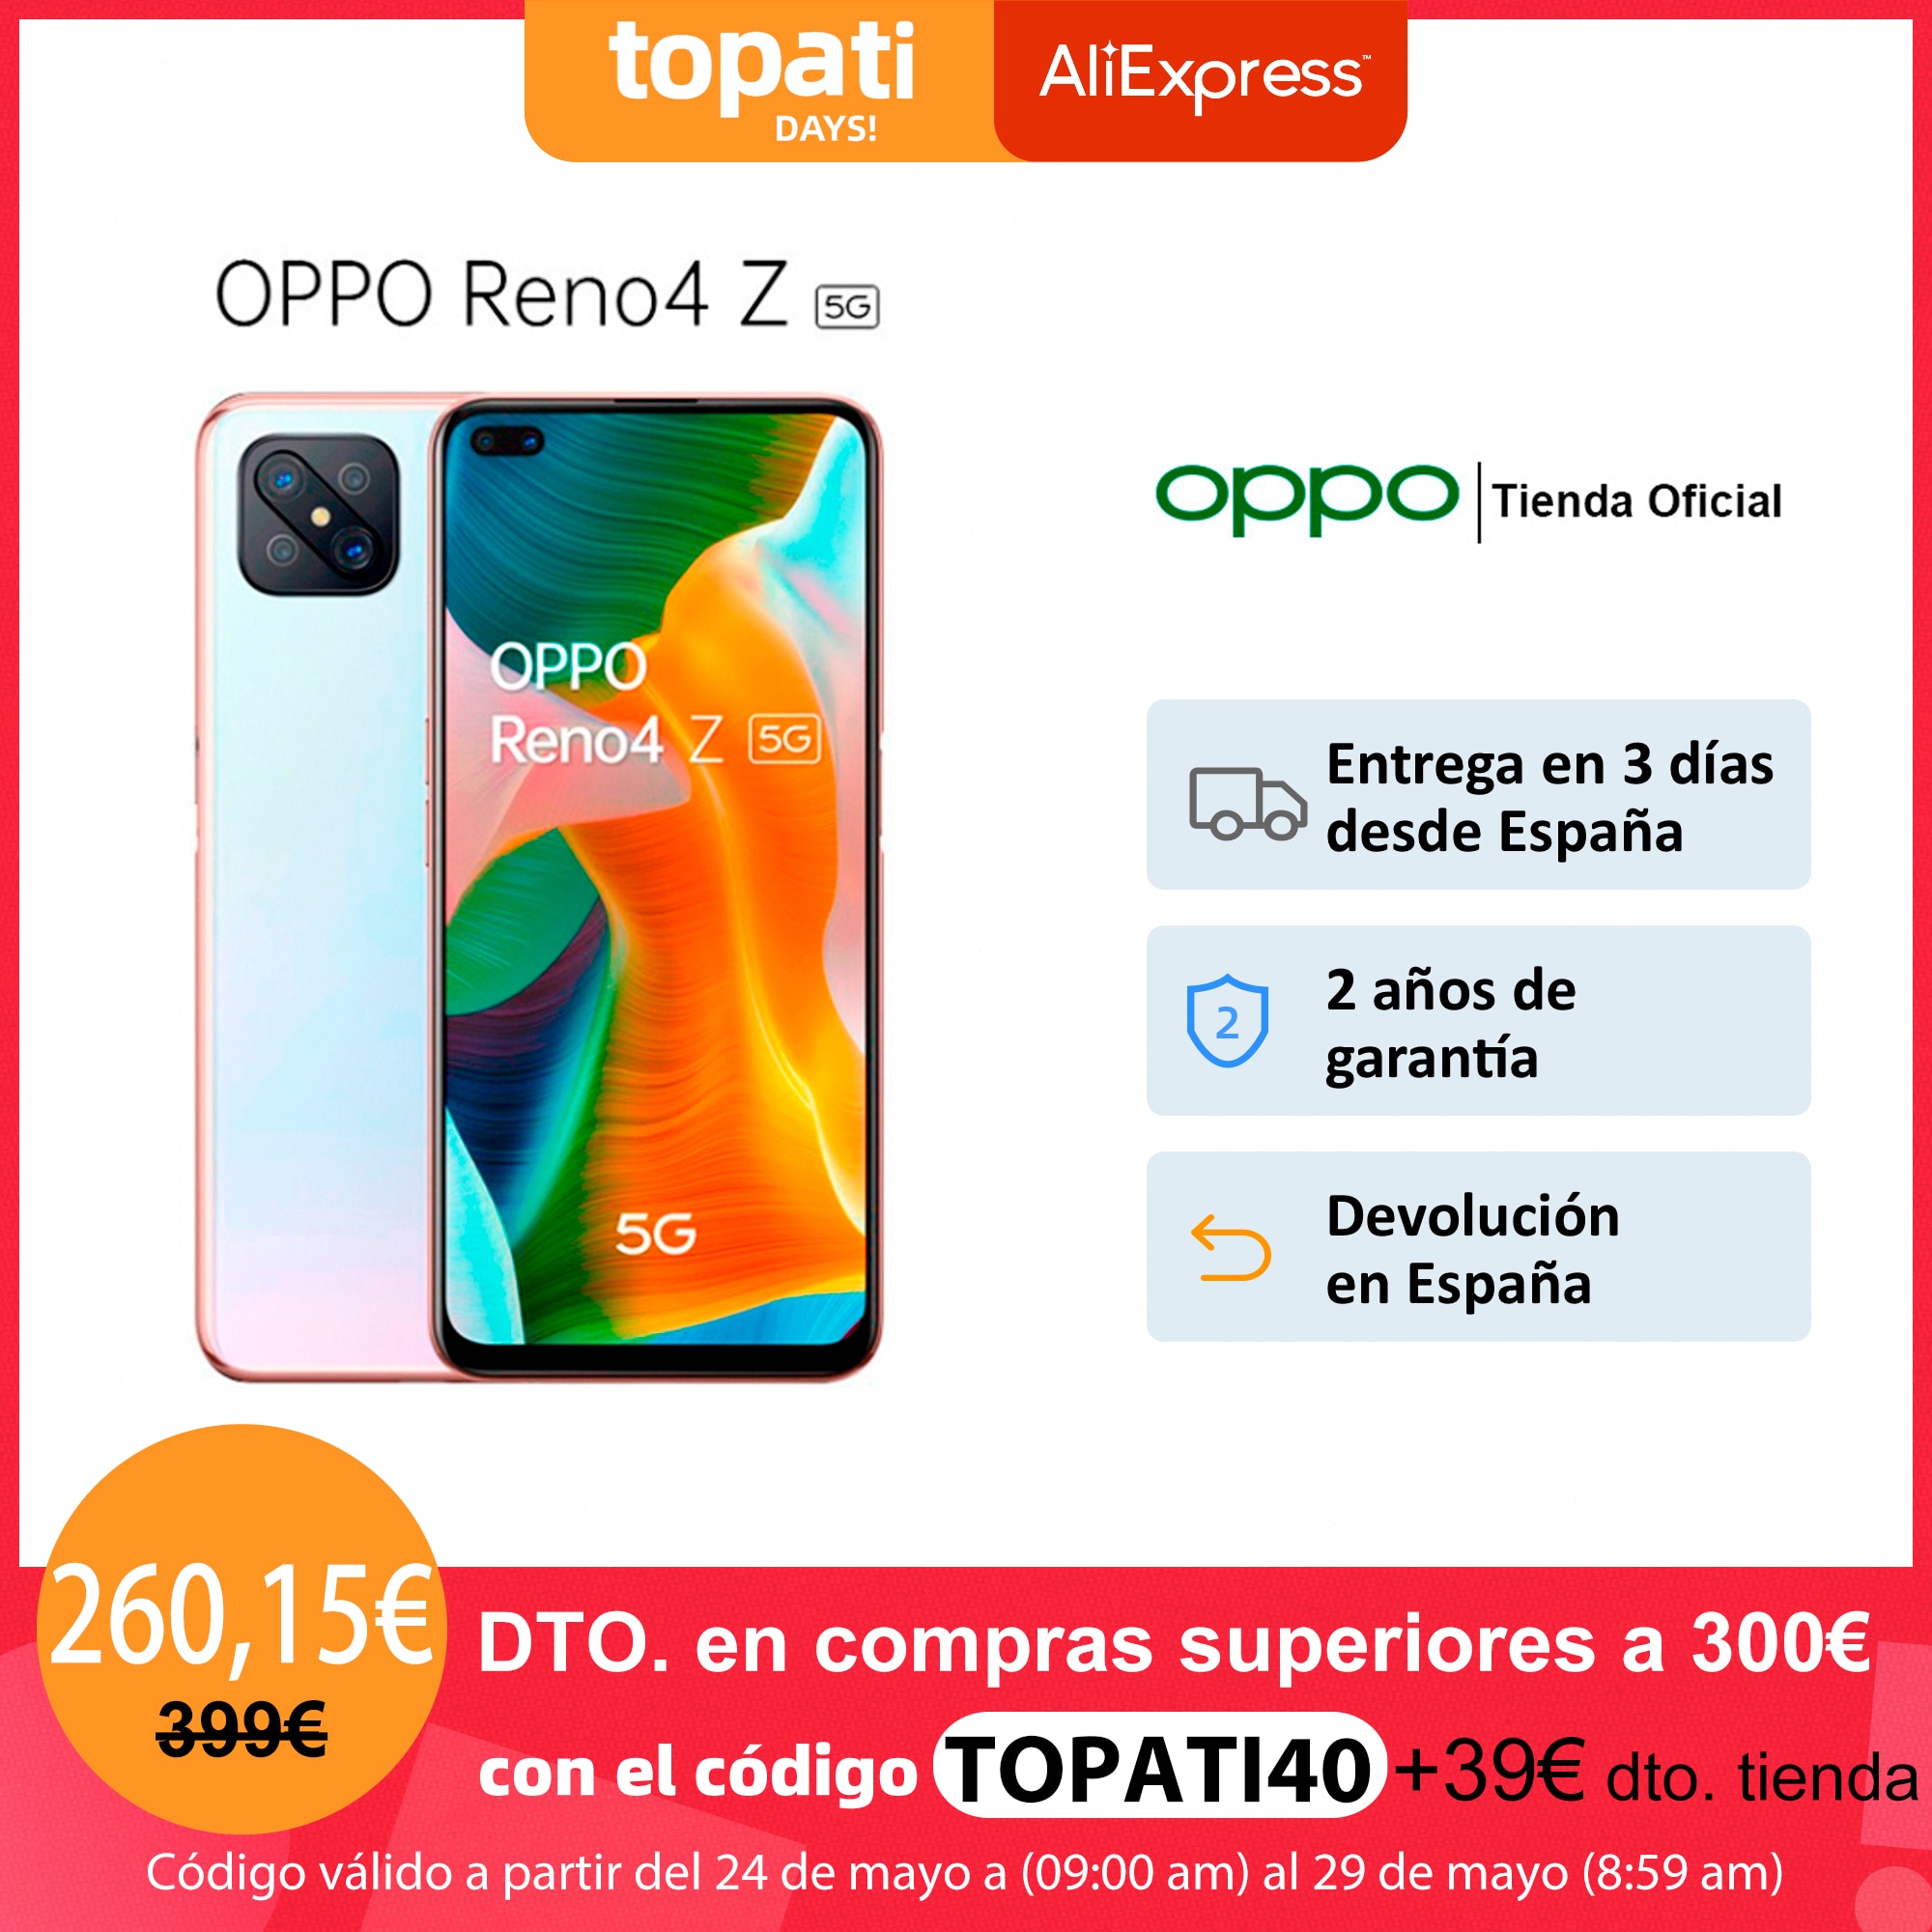 OPPO Reno 4 Z 5G 8GB/128GB, Smartphones, dual front camera, 6.57 "screen, 4000 mAh, Android 10, fast delivery Spain|Cellphones| - AliExpress